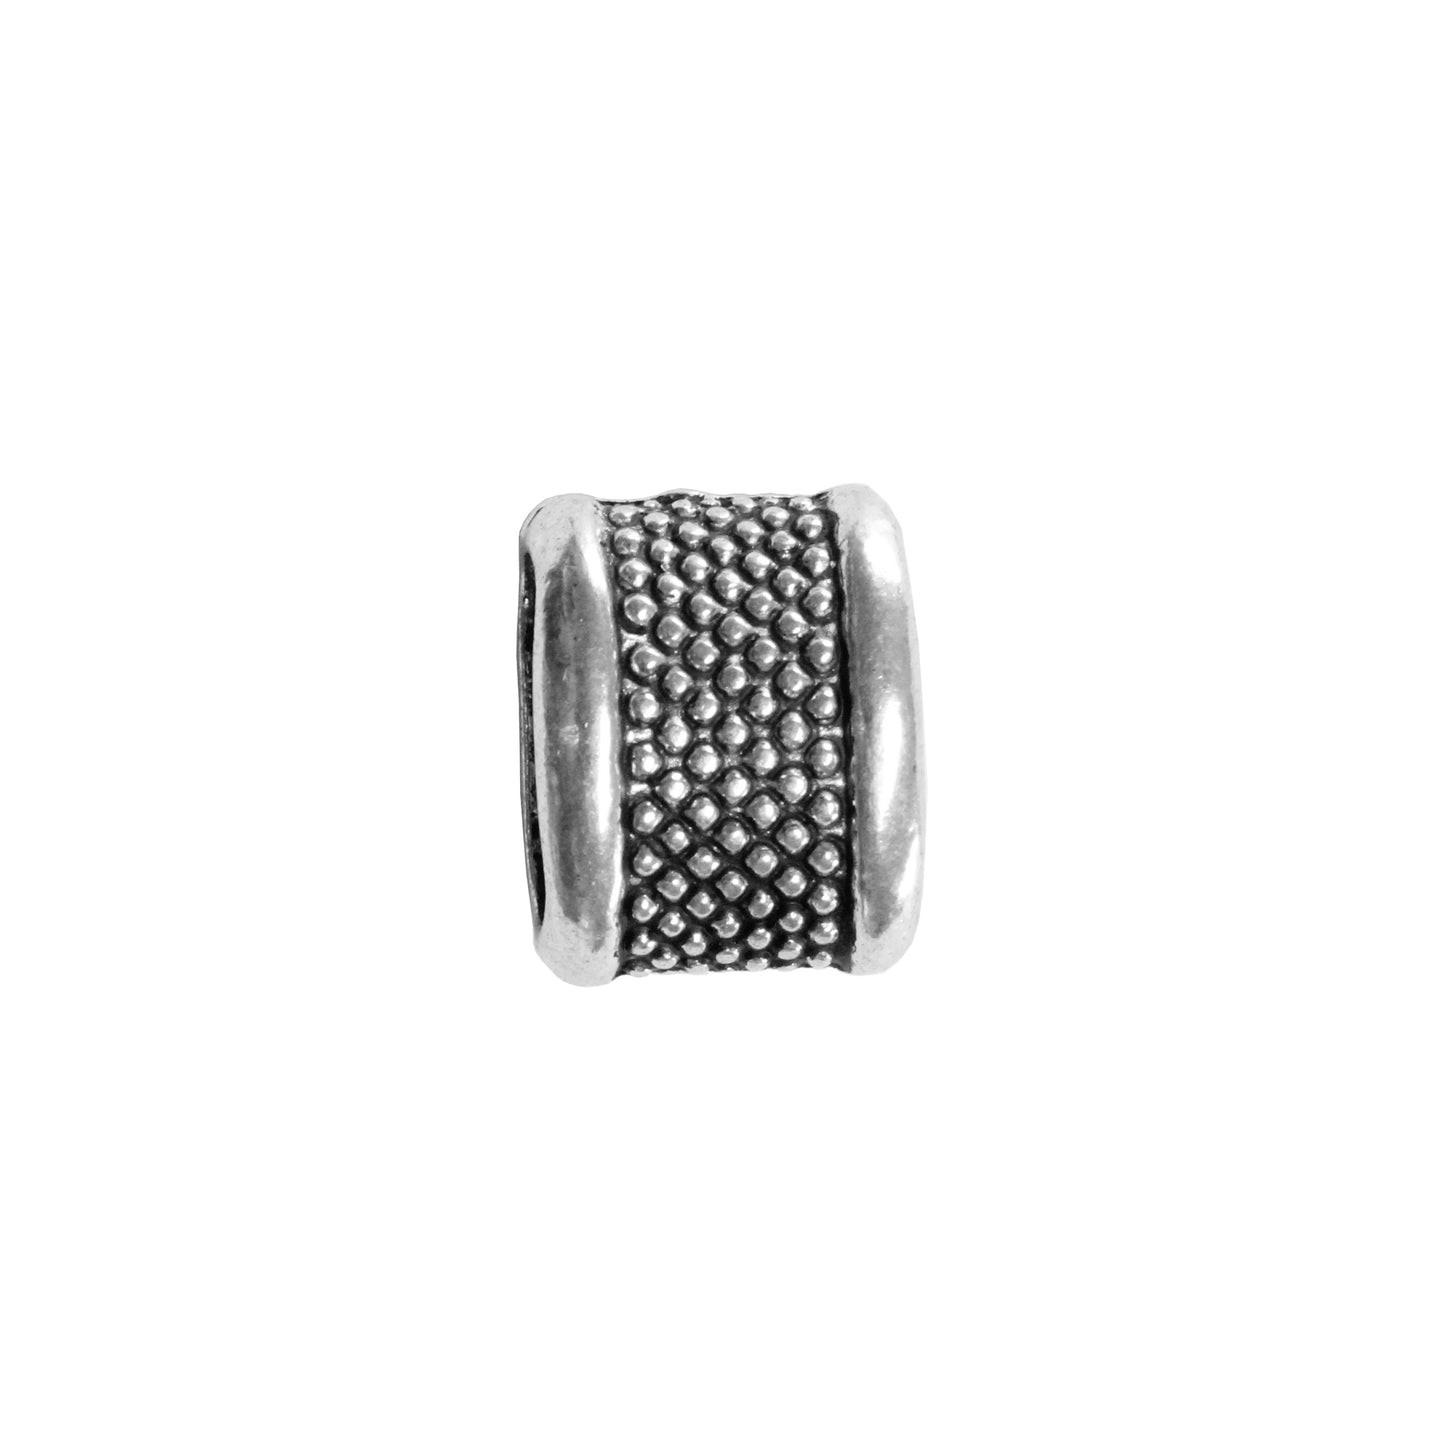 Banded Dots Slider Spacer Bead Antique Silver / 10 x 6.5mm / for use with licorice or Regaliz cords